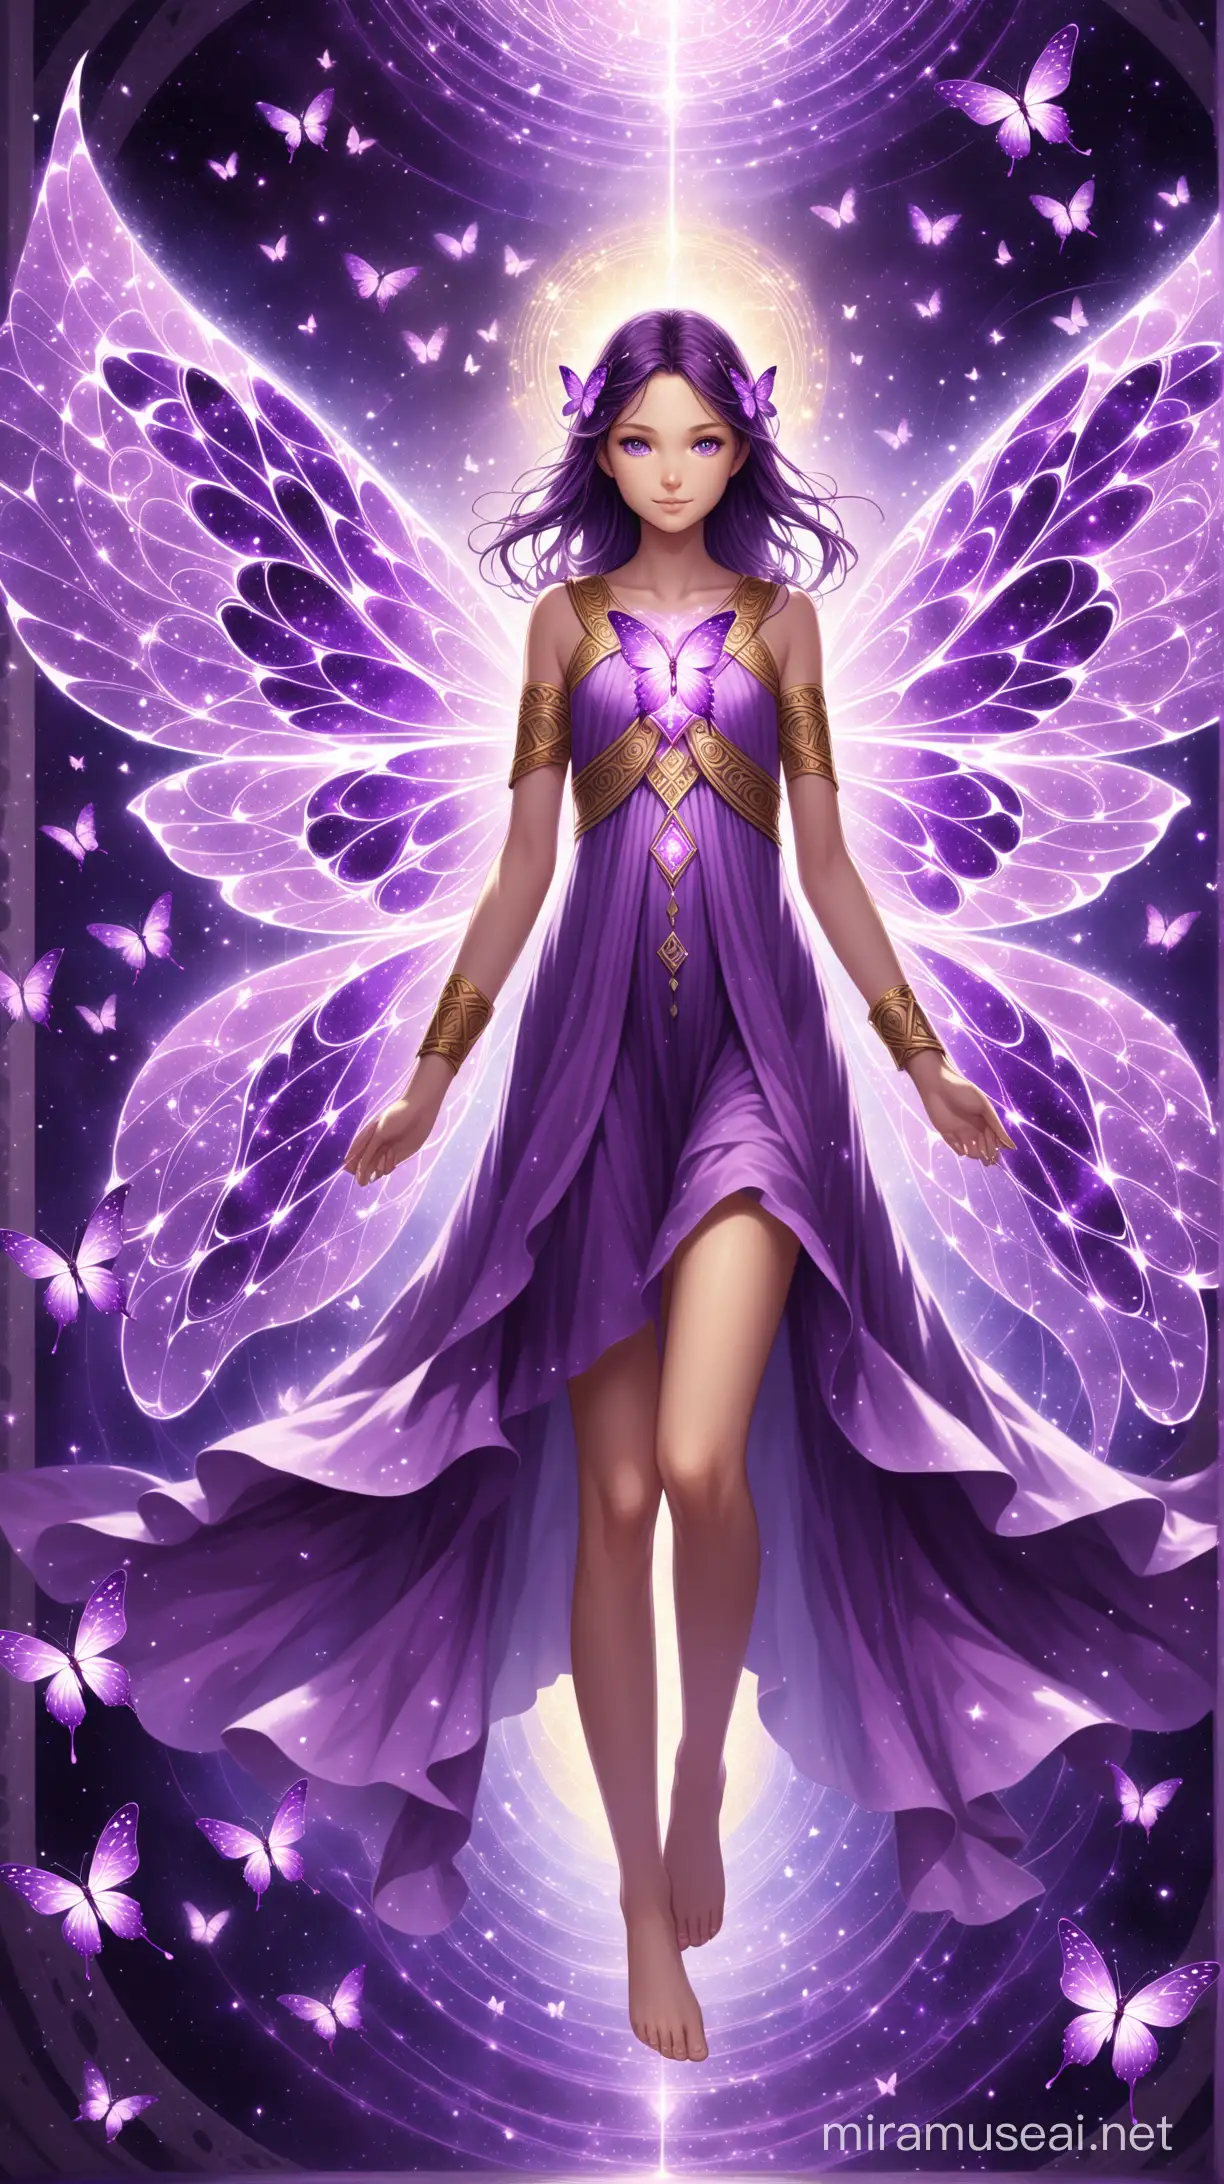 Ethereal Butterfly Maiden in a Purple Fractal Void